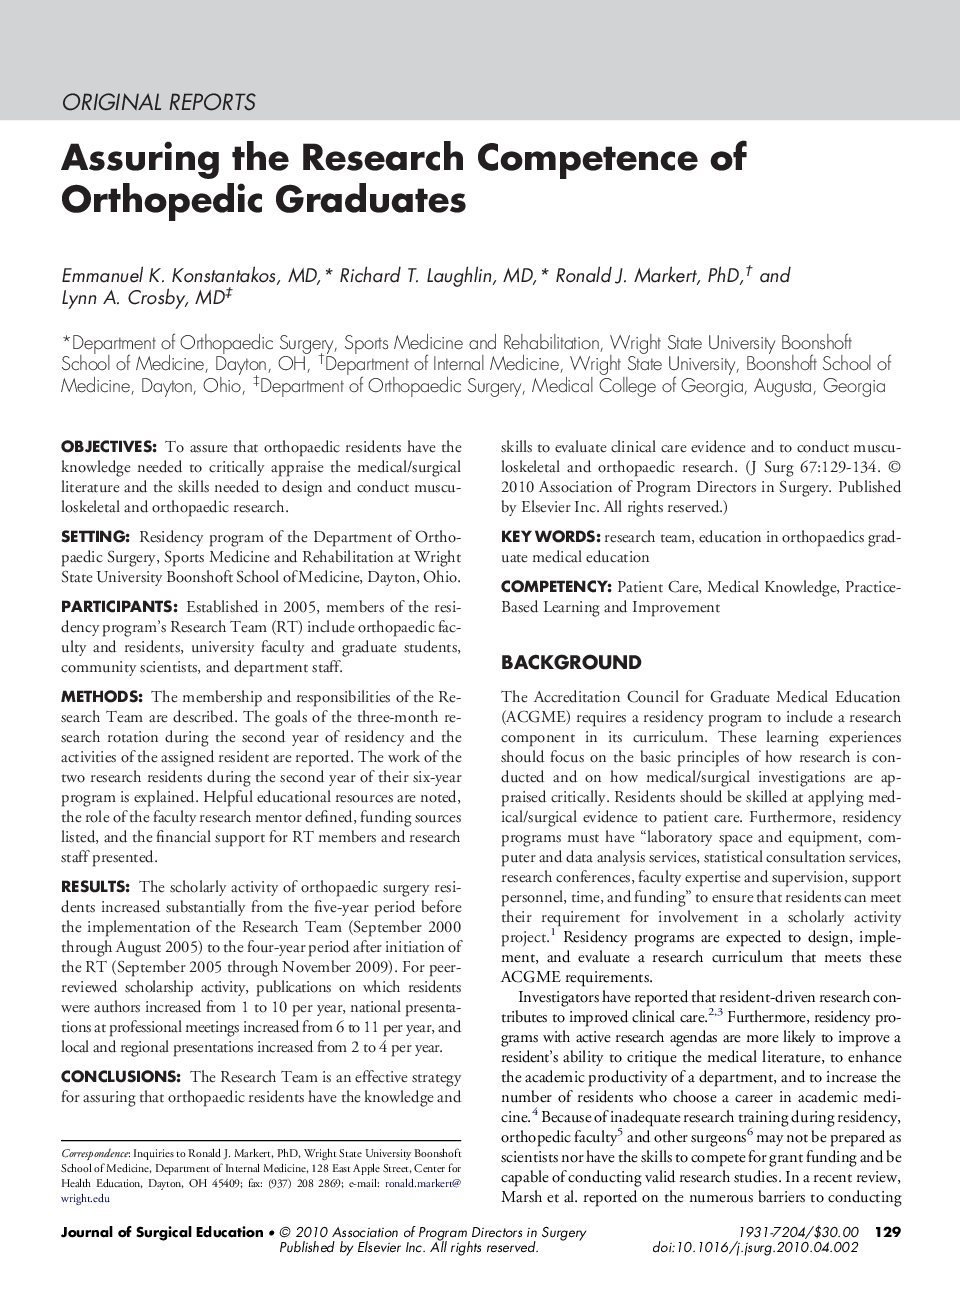 Assuring the Research Competence of Orthopedic Graduates